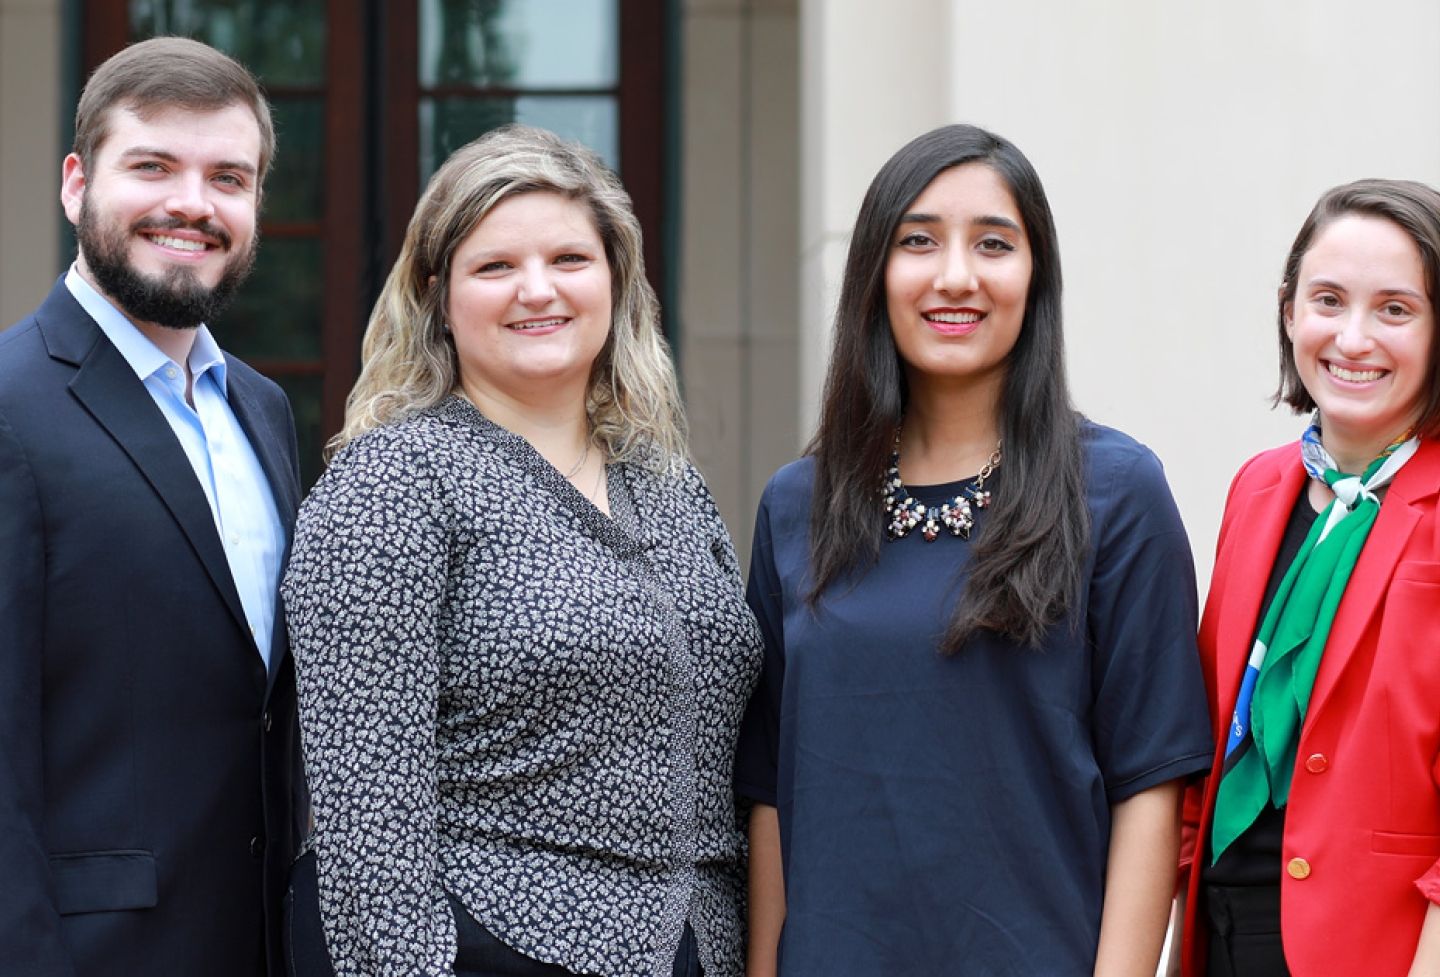 Molly Cain ’20, Manal Cheema ’20, Eleanora Kaloyeropoulou ’20 and Read Mills ’20 were named 2019-2020 Ritter Scholars in August.